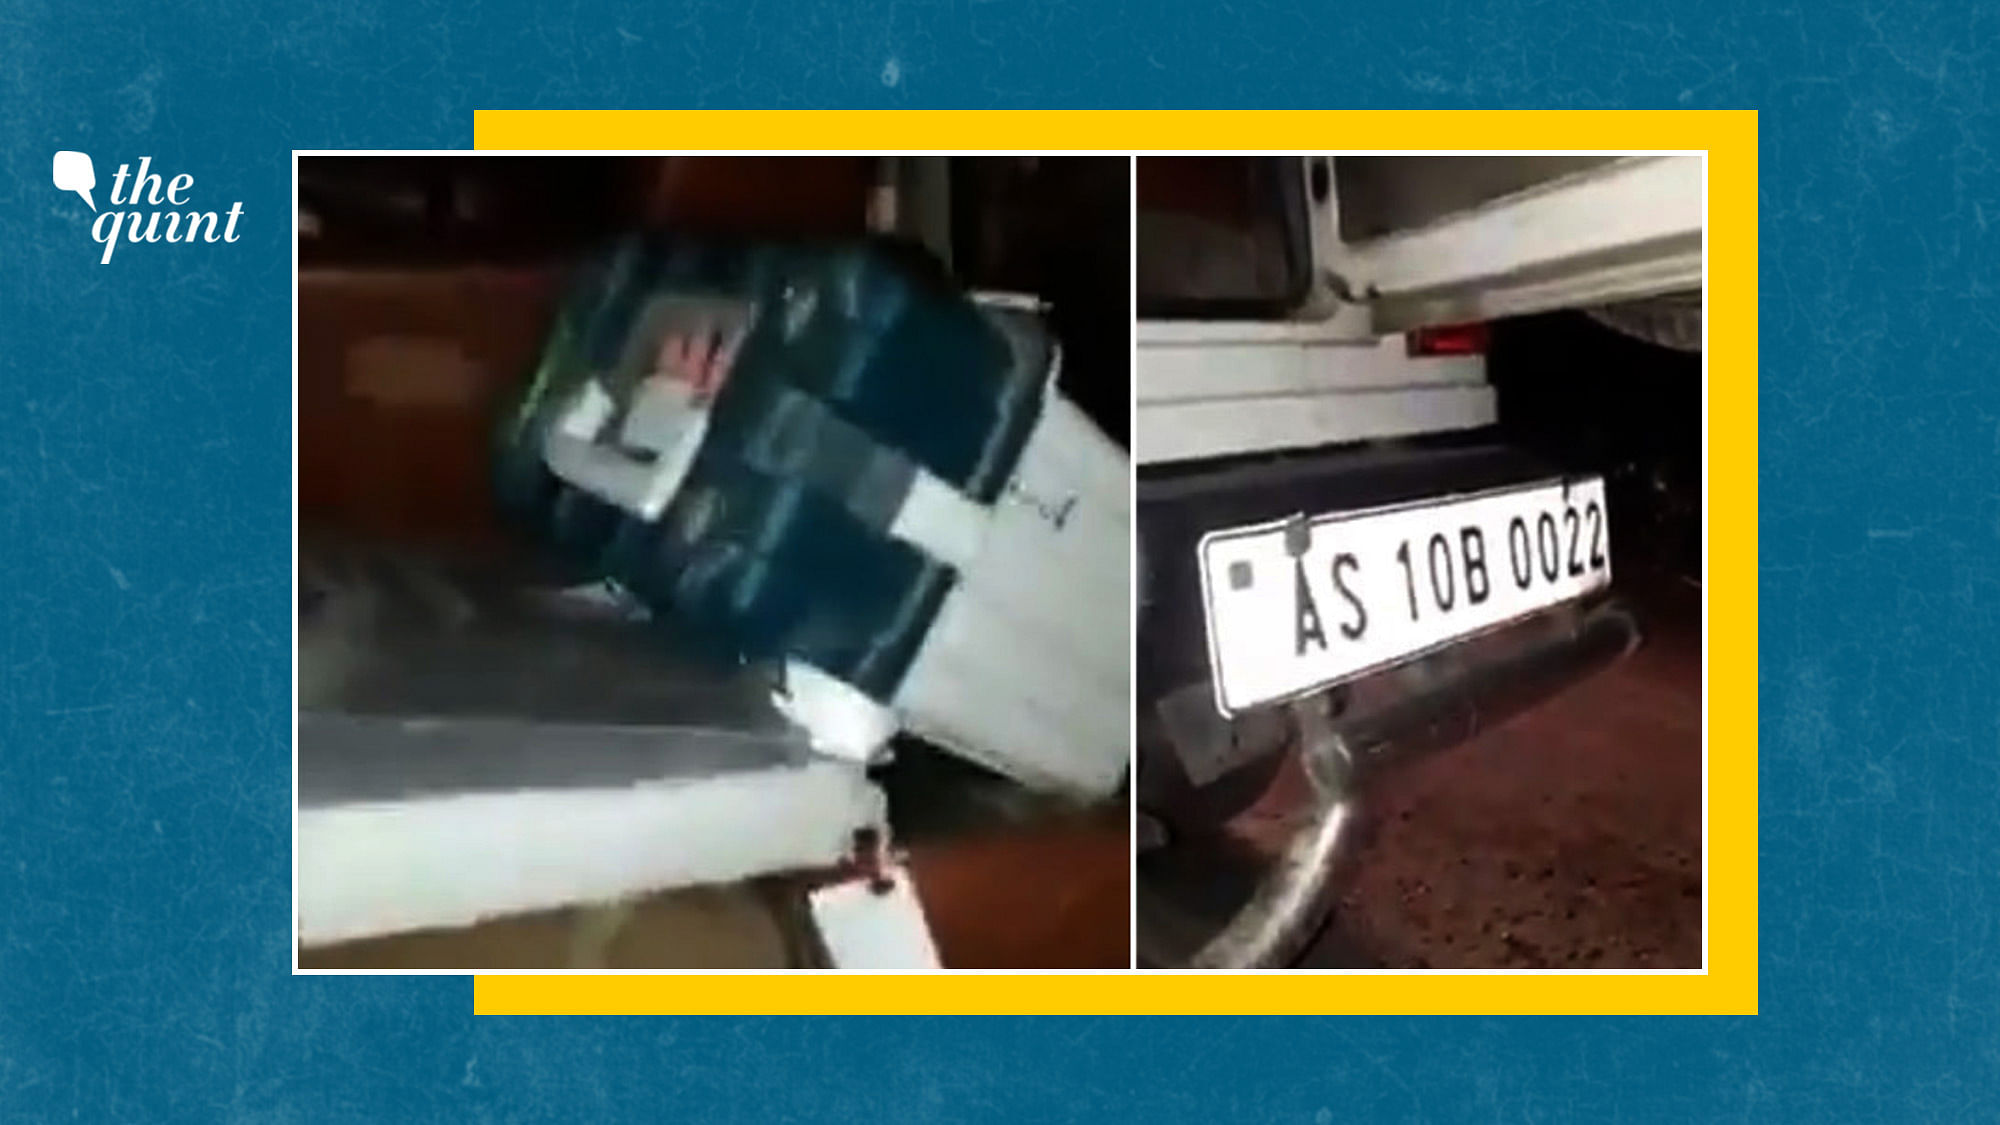 EVM-VVPAT machines found in a BJP leader’s car and at a TMC leader’s relative’s residence,  raise concerns on the handling of these machines by Election Commission. So far, no complaint of malafide intent has been filed with EC, but isn’t the frequency alarming?